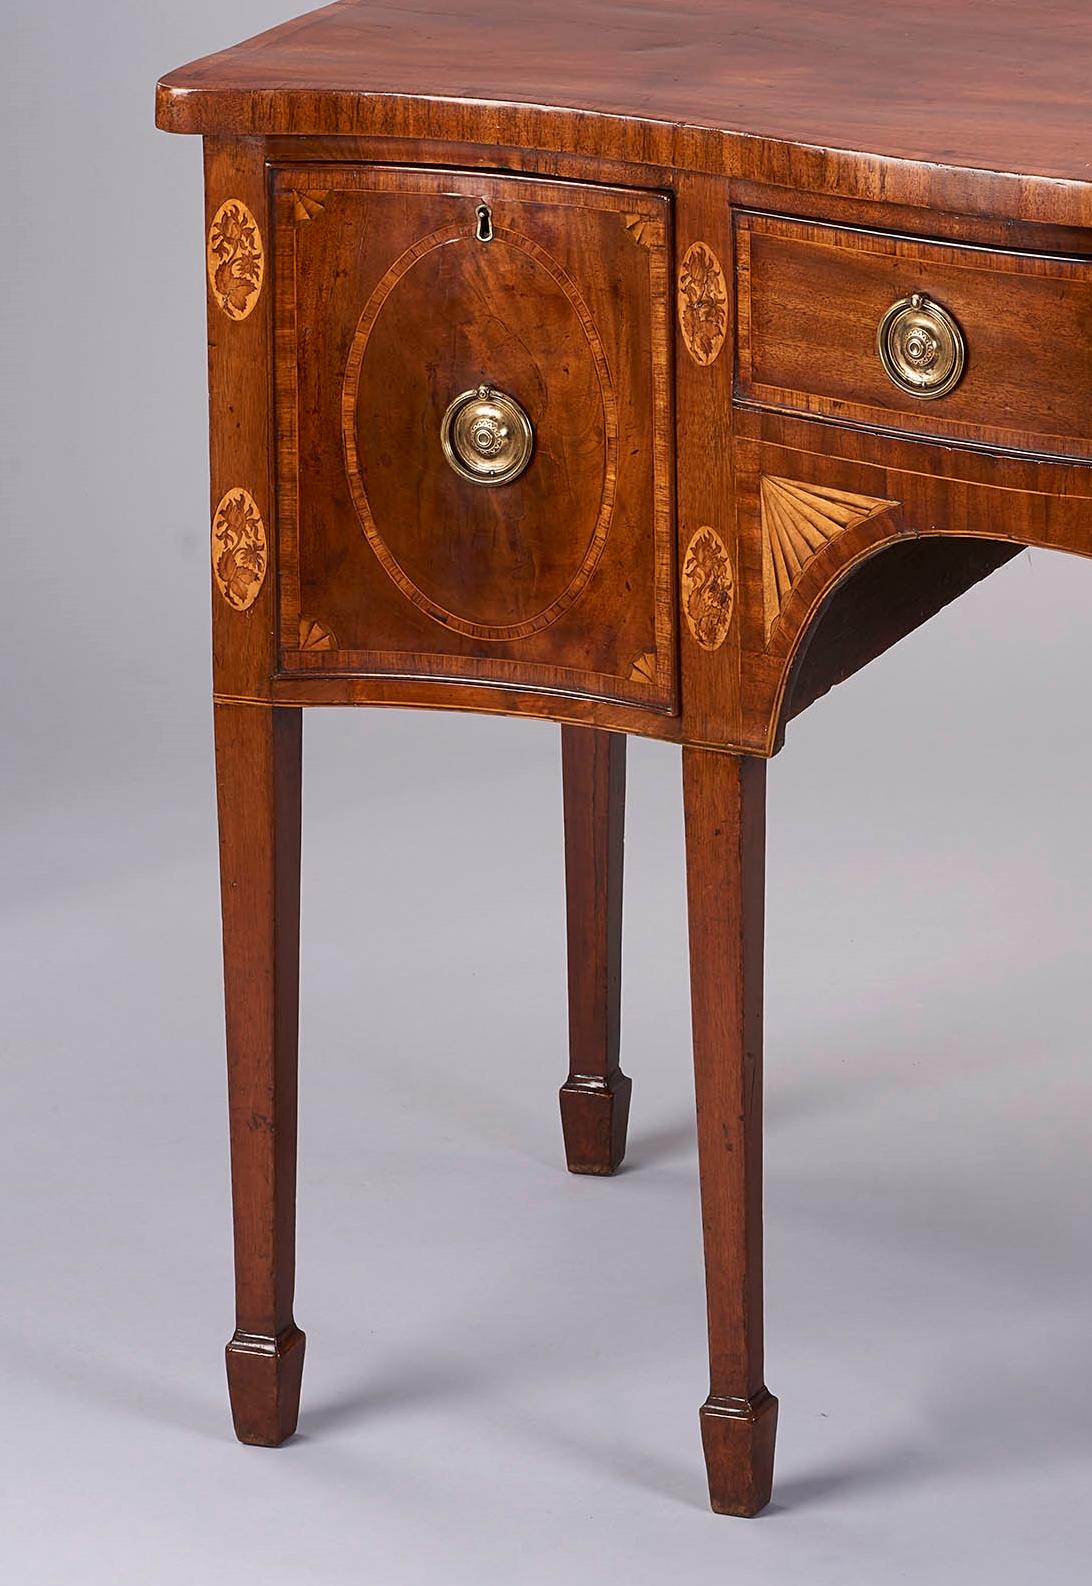 Very fine George III period mahogany serpentine-fronted sideboard in the Sheraton style; of particularly good color and patina; fitted with three cross-banded drawers, those on the left and right with inlaid oval panels; the stiles each inlaid with